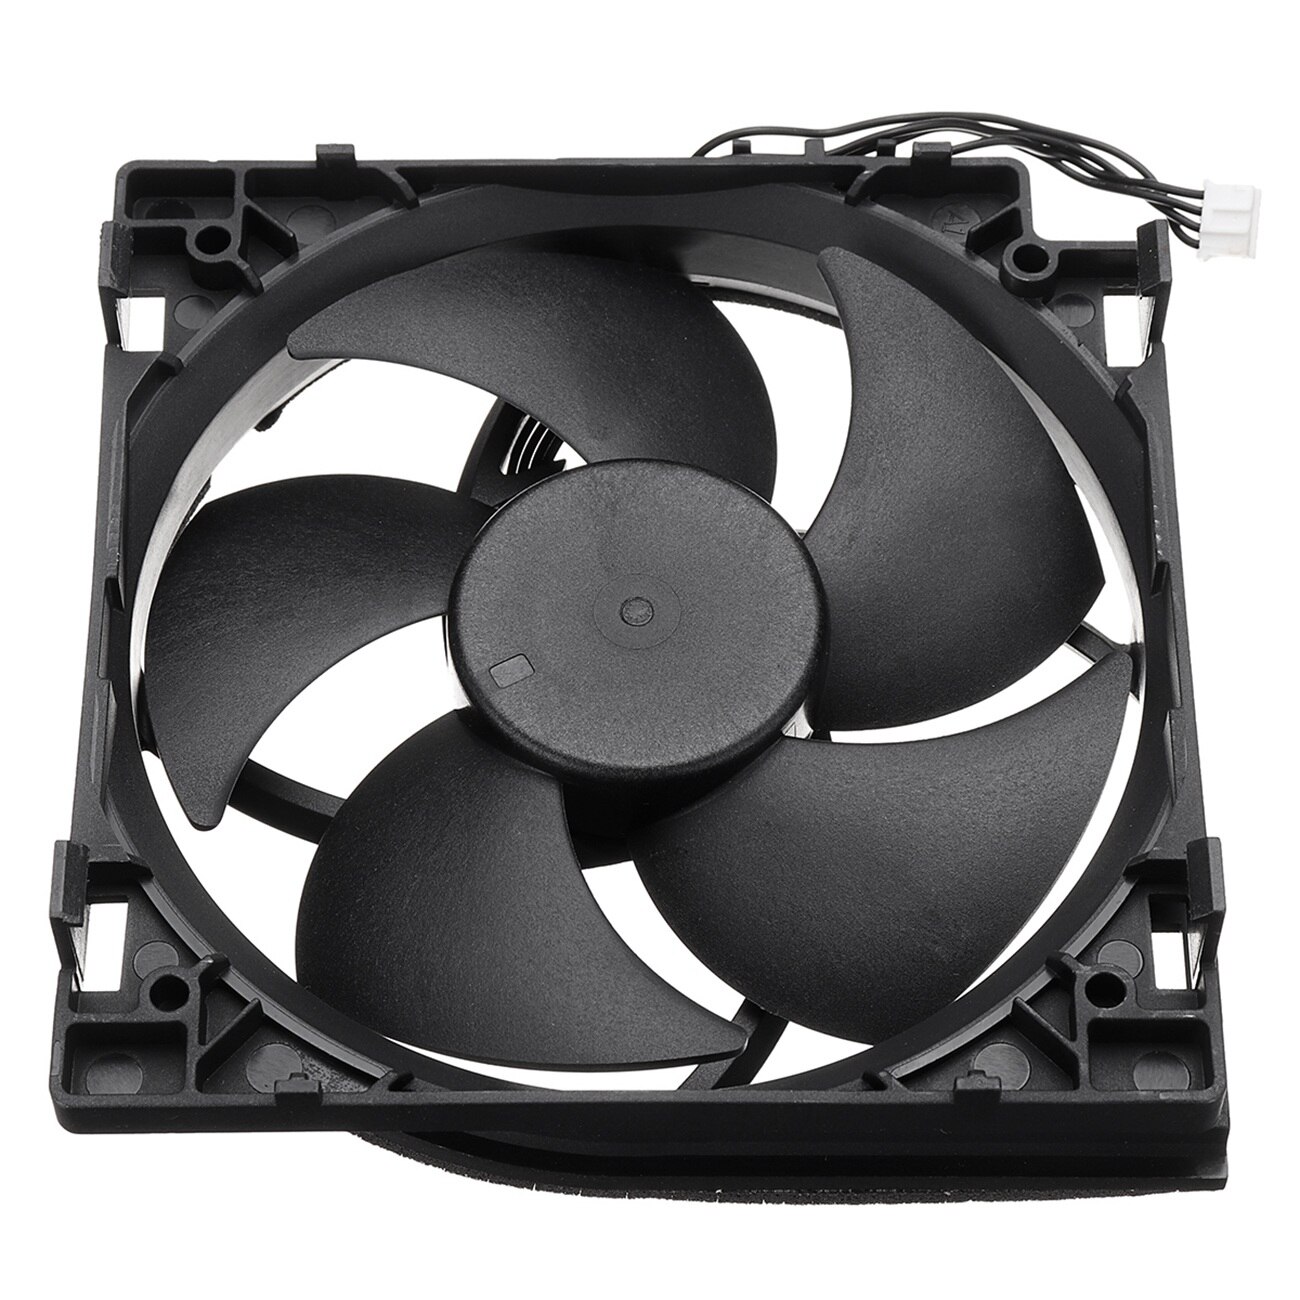 Cpu Cooler Fans Vervanging Cooler Fan 5 Blades 4 Pin Connector Cooling Fan Voor Xbox One S Plastic